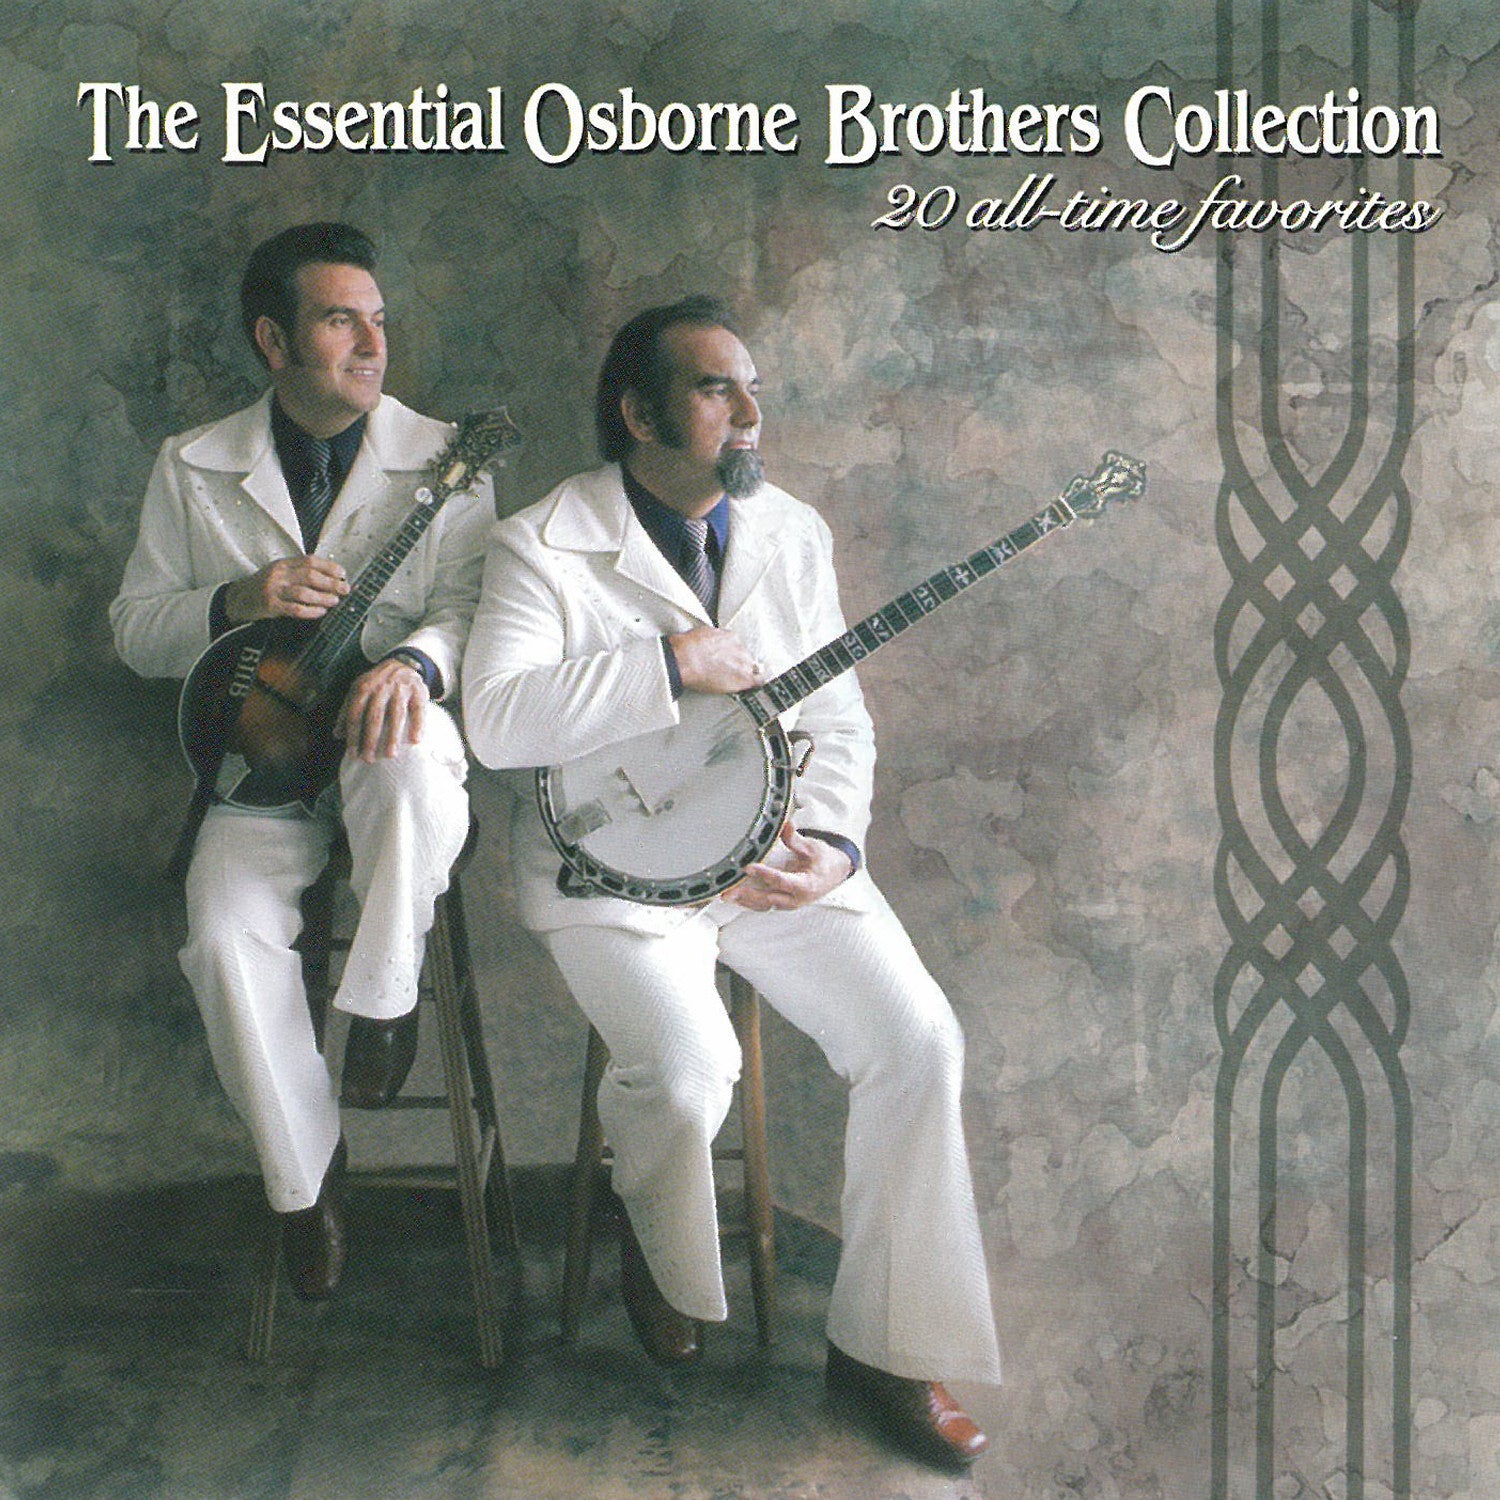 The Essential Osborne Brothers Collection